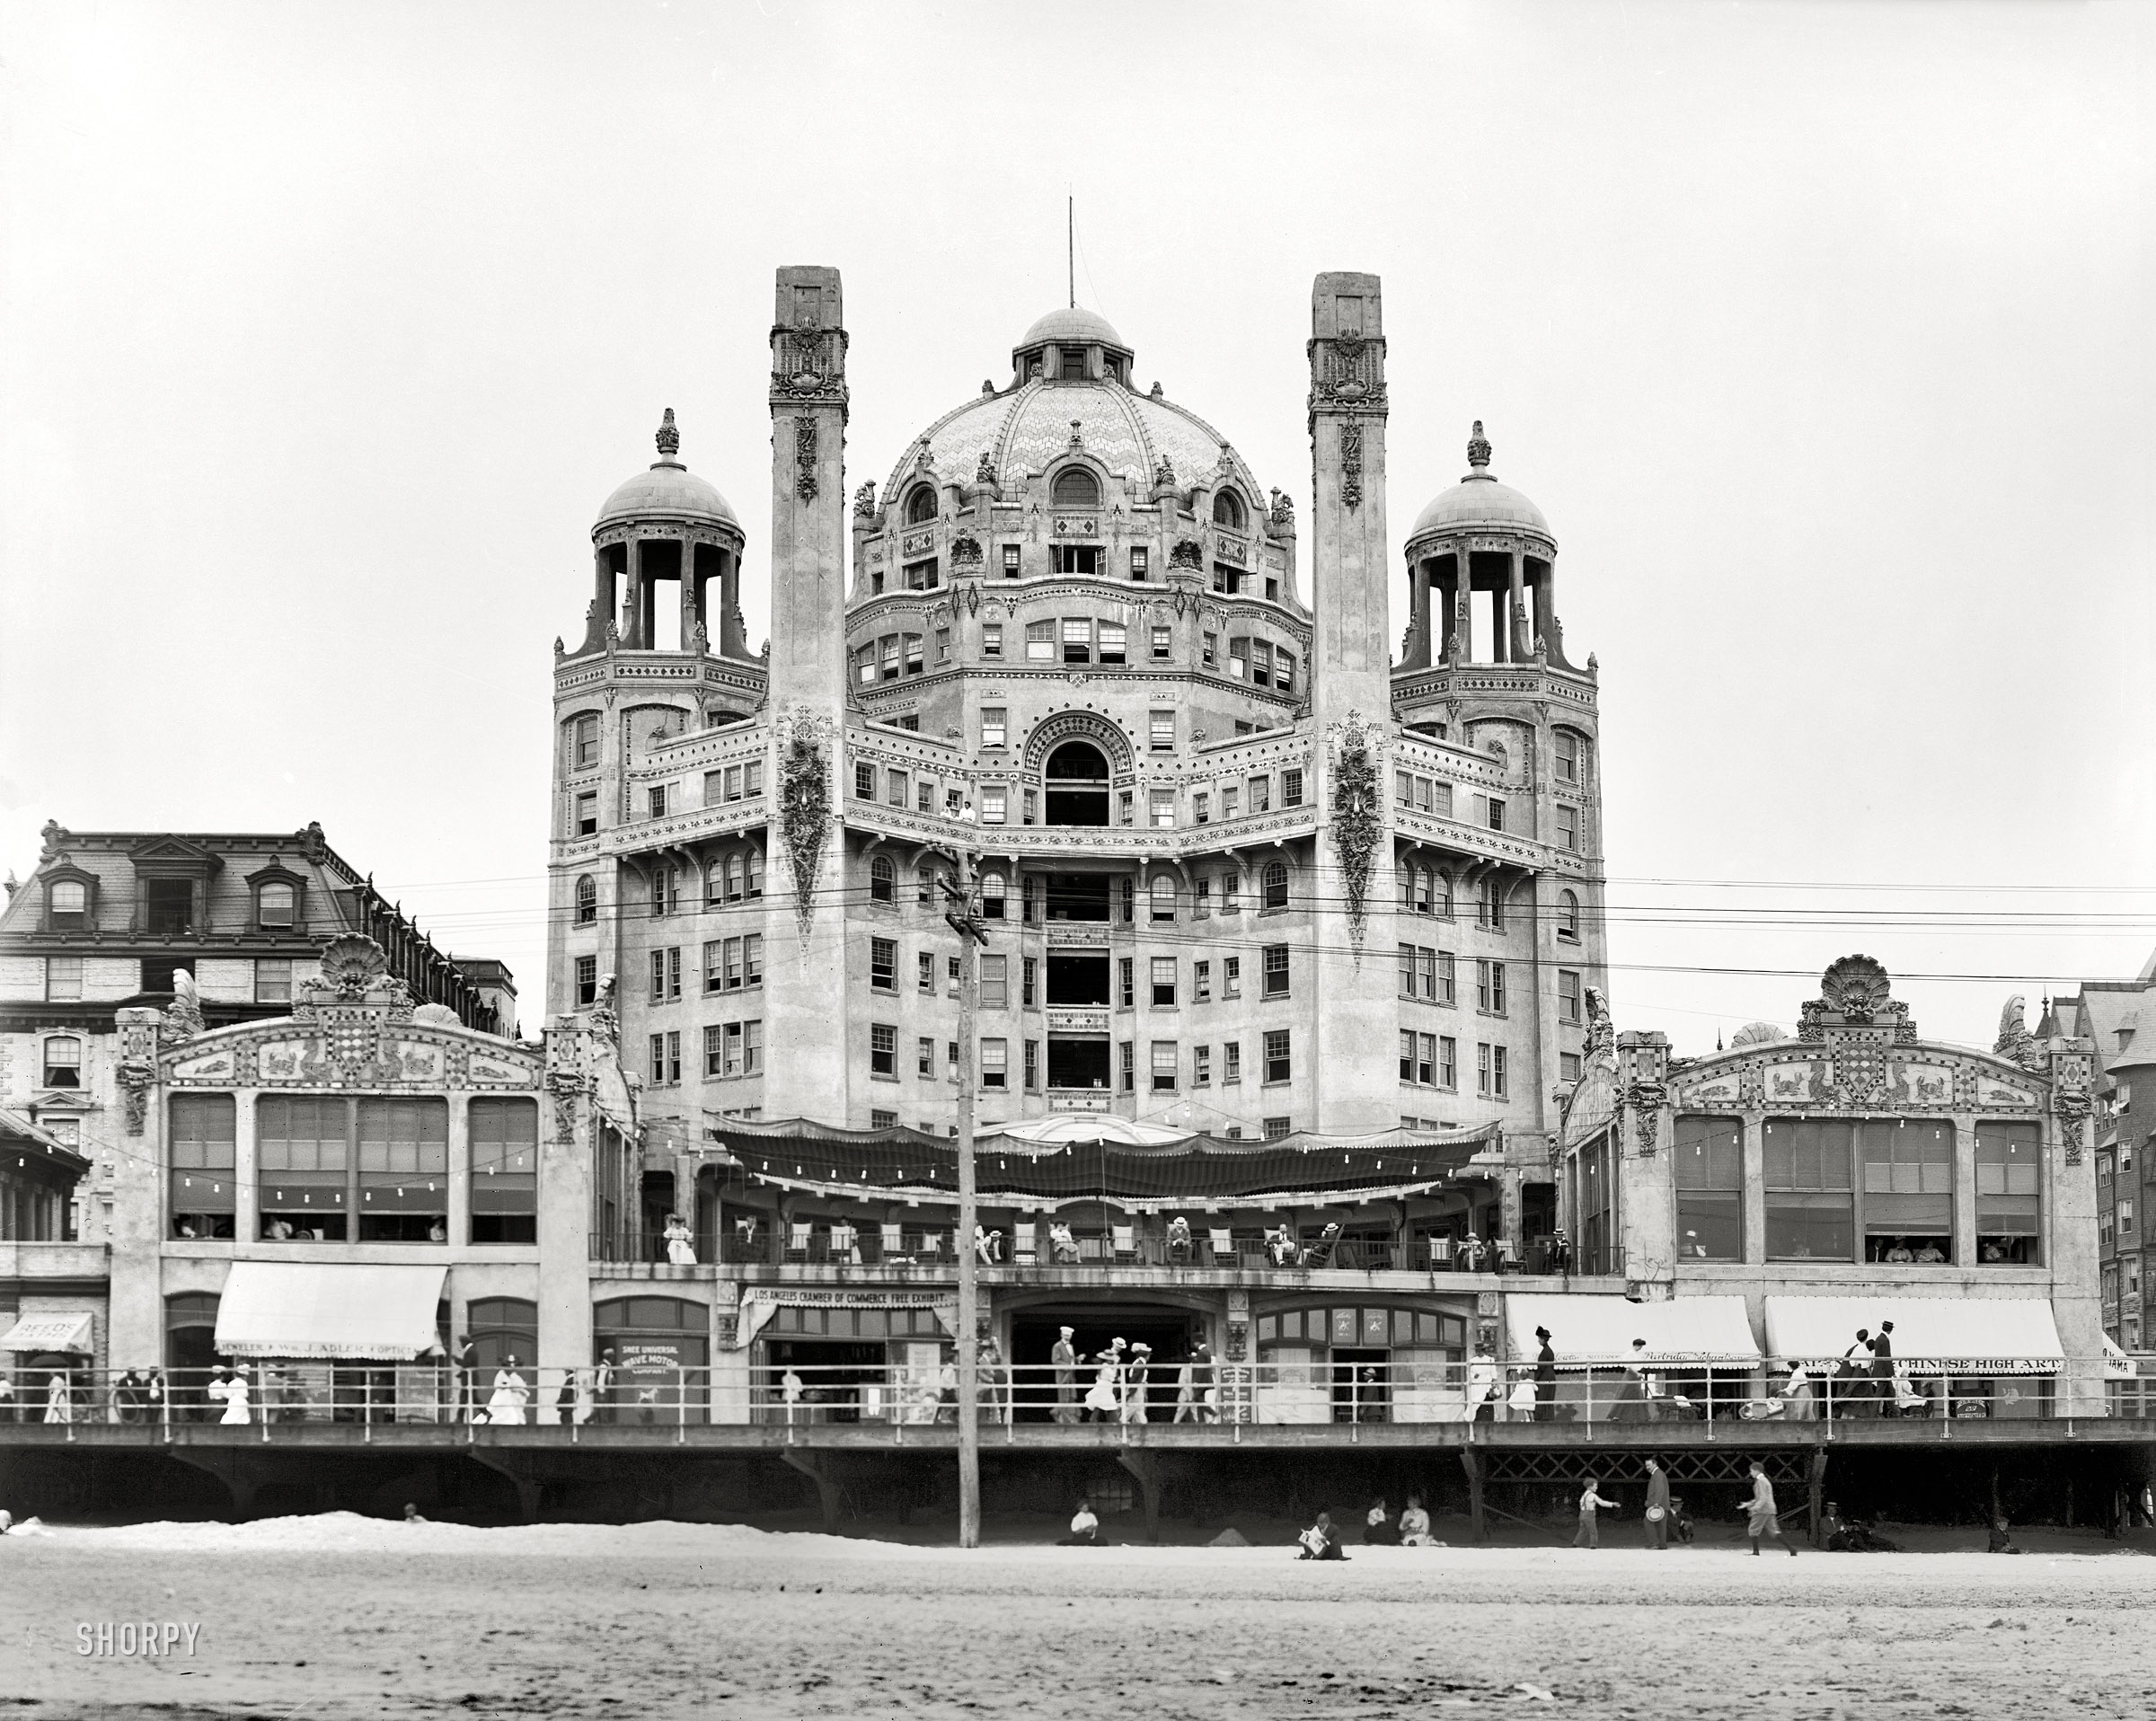 Atlantic City, New Jersey, circa 1908. "Marlborough-Blenheim Hotel." All this needs is some icing and a bride and groom on top. View full size.